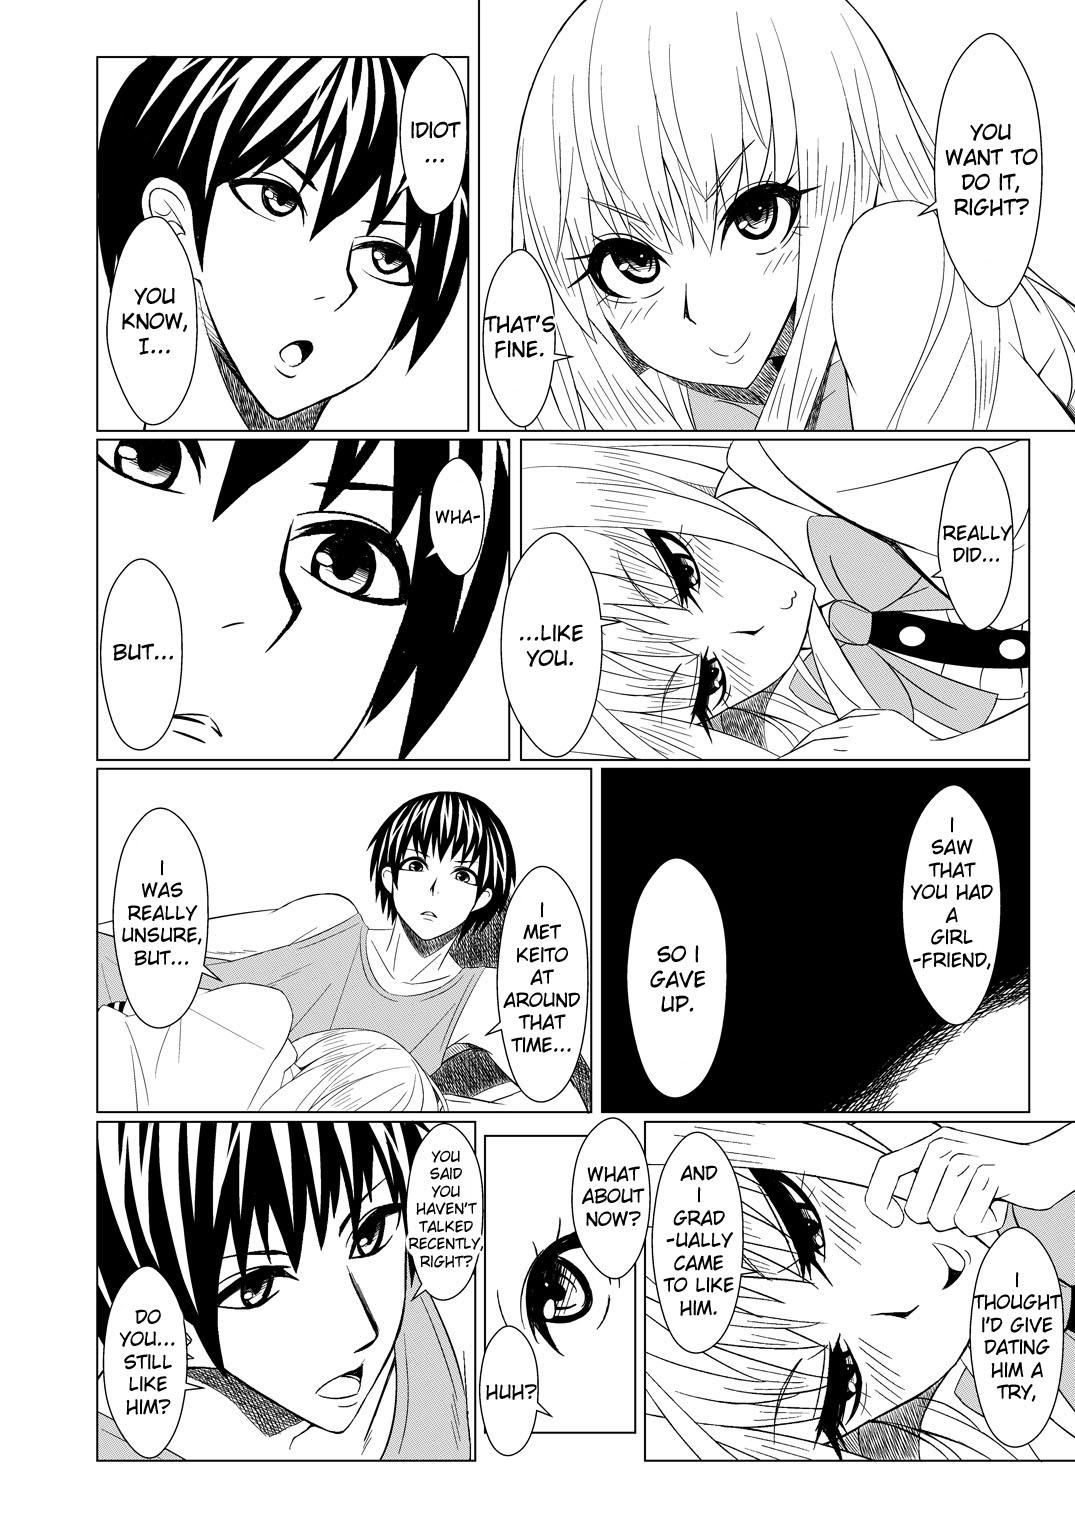 Piss Tenshi came to my Place - Touhou project Bukkake Boys - Page 5